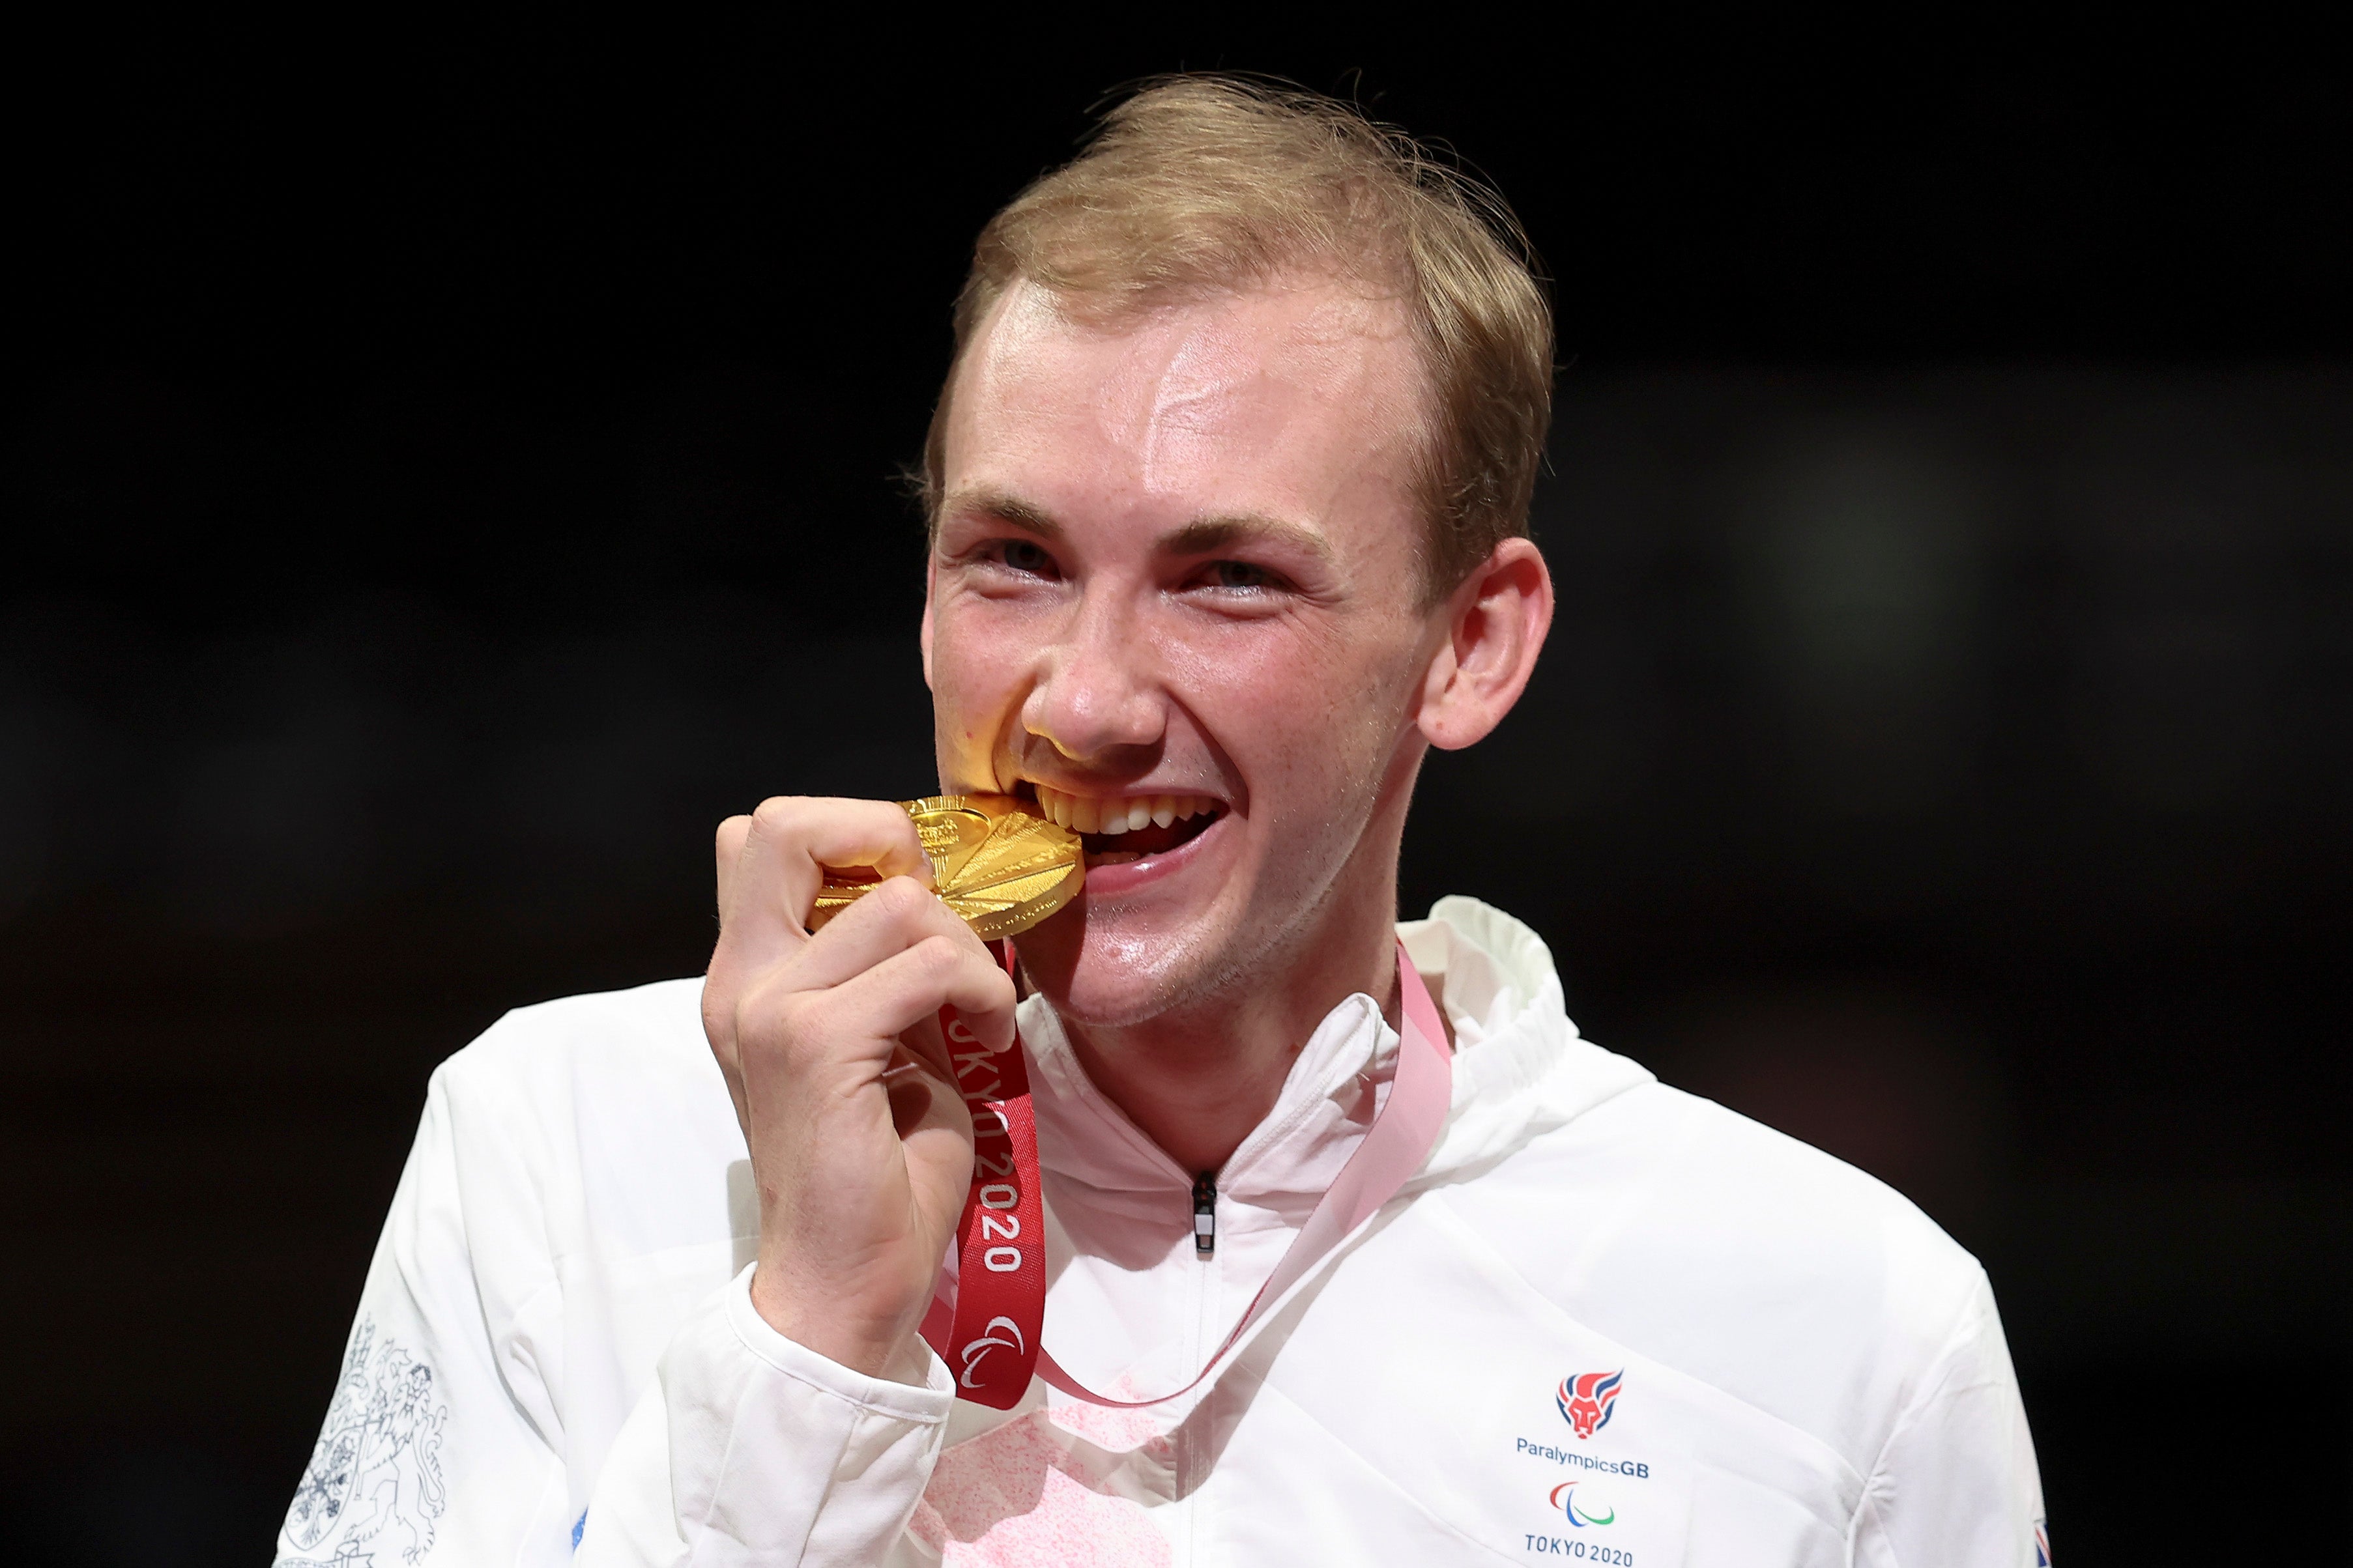 Gilliver became ParalympicsGB’s first wheelchair fencing gold medallist for 33 years in Tokyo